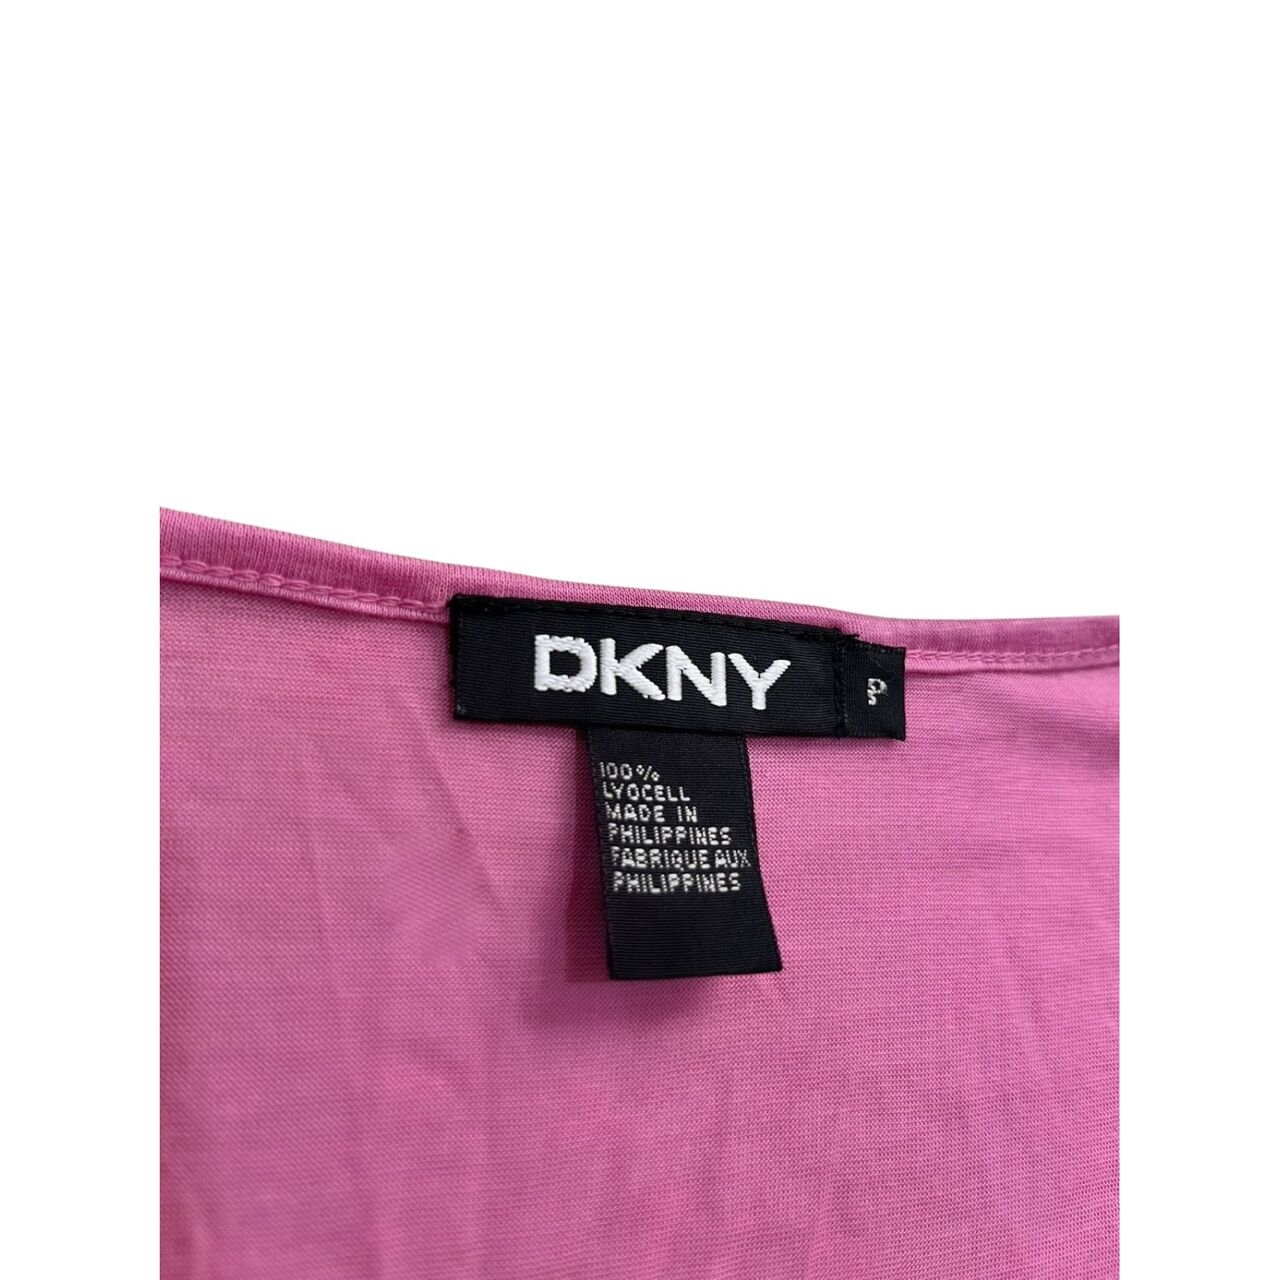 Dkny Pink Floral Blouse